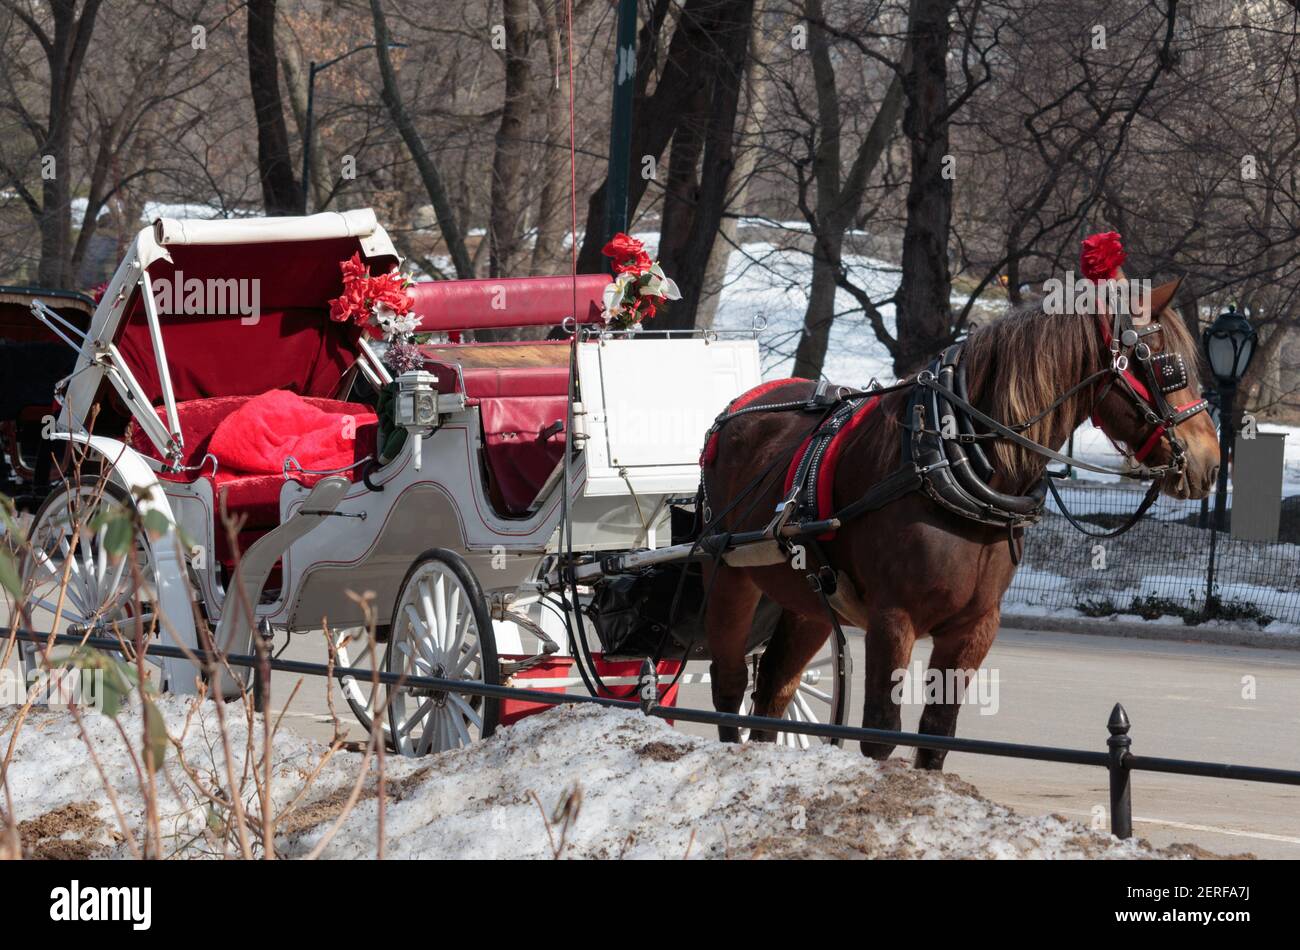 Central Park carriage horse dressed in a red headdress and hitched to a carriage waits empty waiting for a customer in Winter with snow on the ground Stock Photo